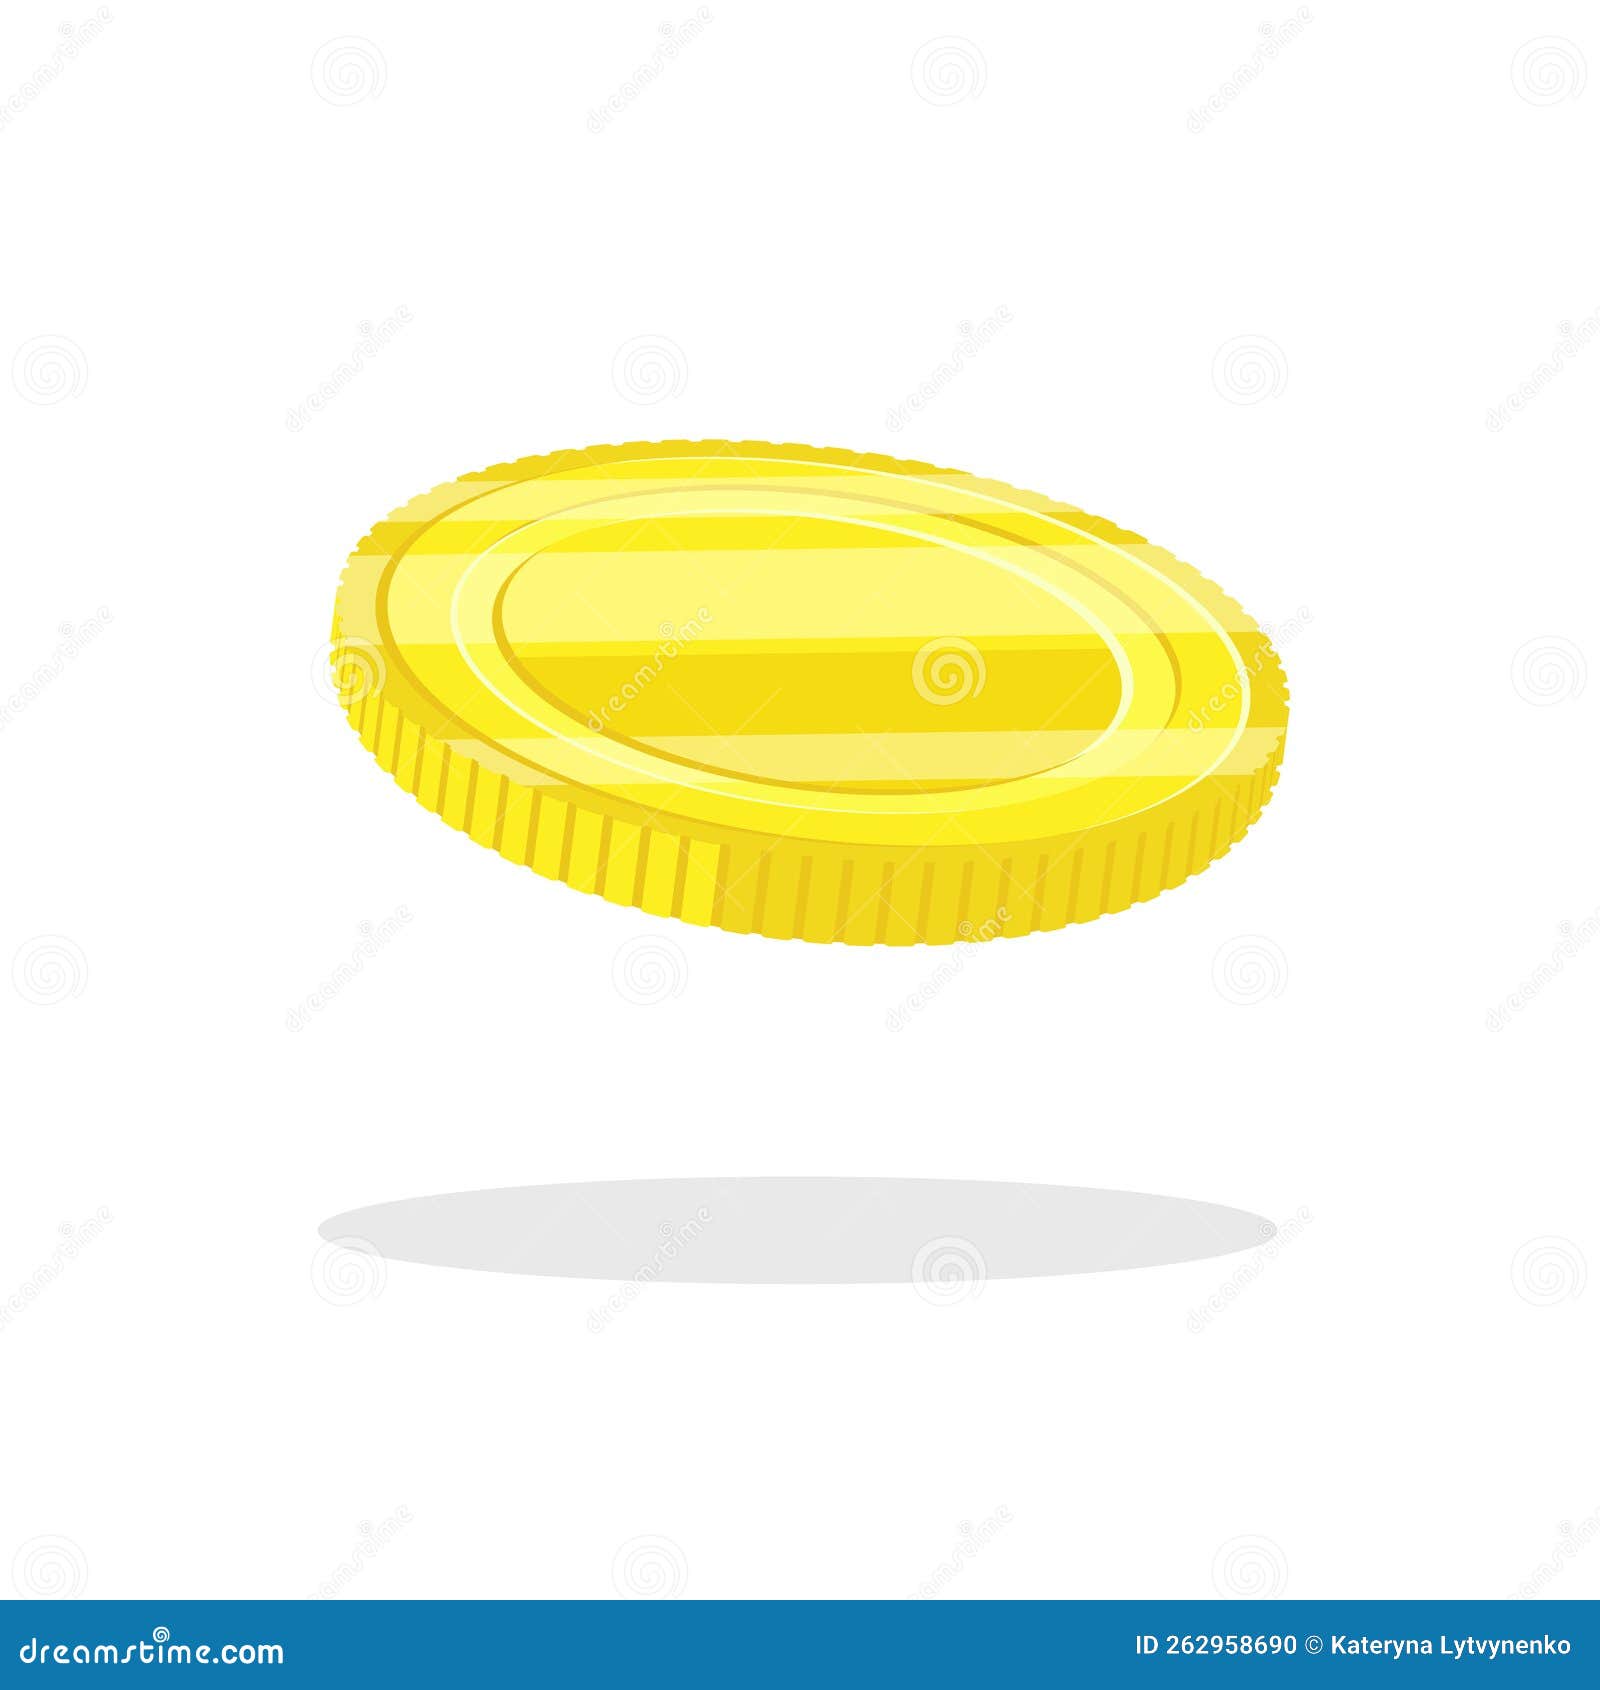 Realistic Image of Gold Coin. Vector Illustration. Rotate Coin ...